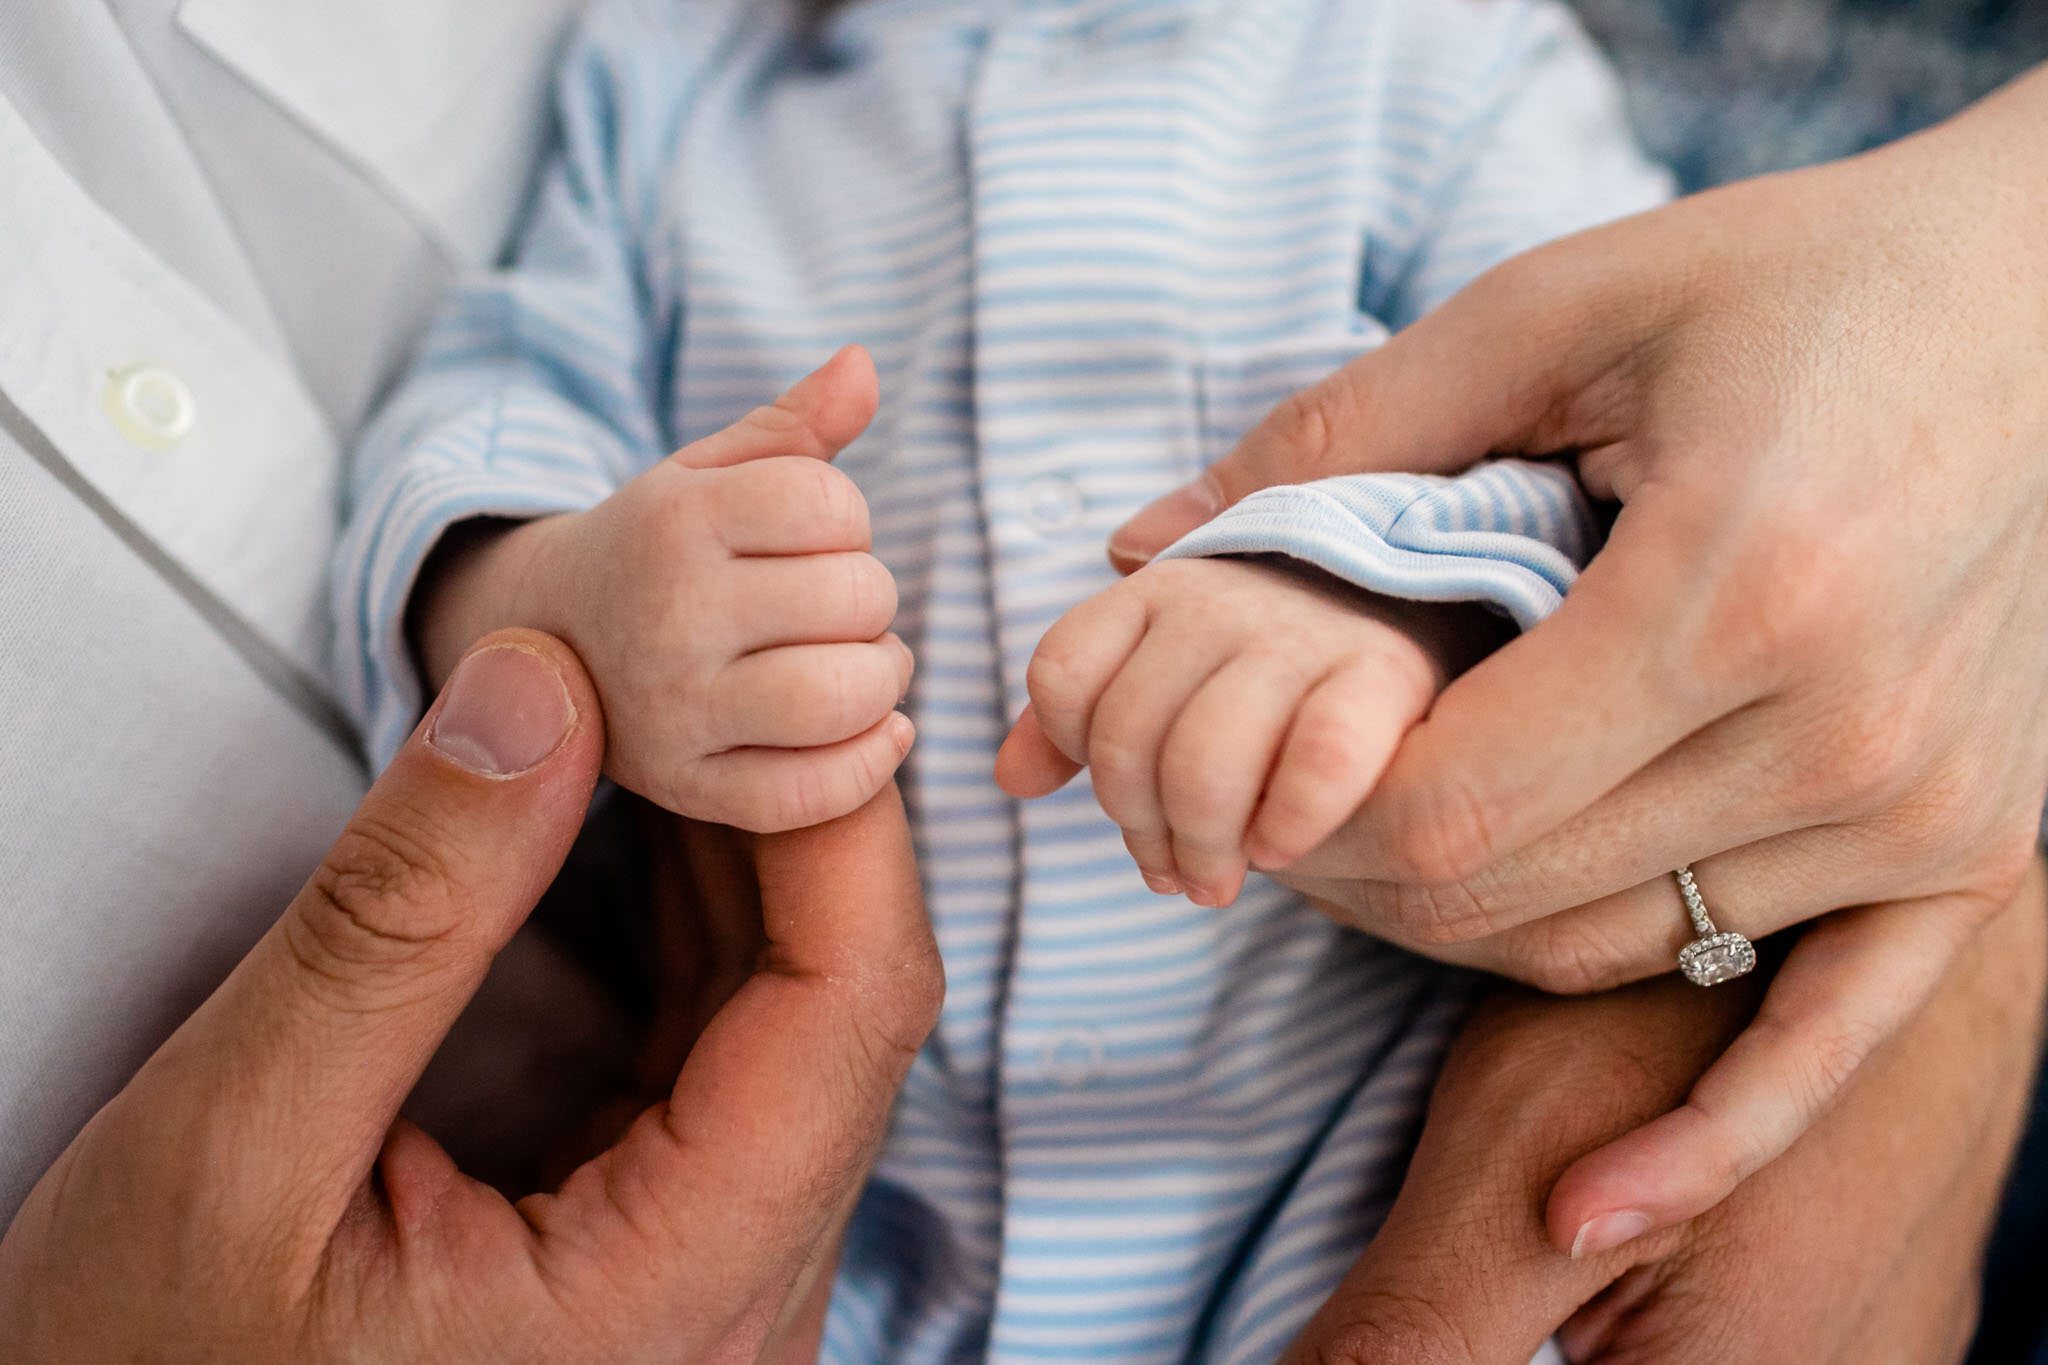 Parents holding baby's hands | Greensboro Newborn Photographer | By G. Lin Photography